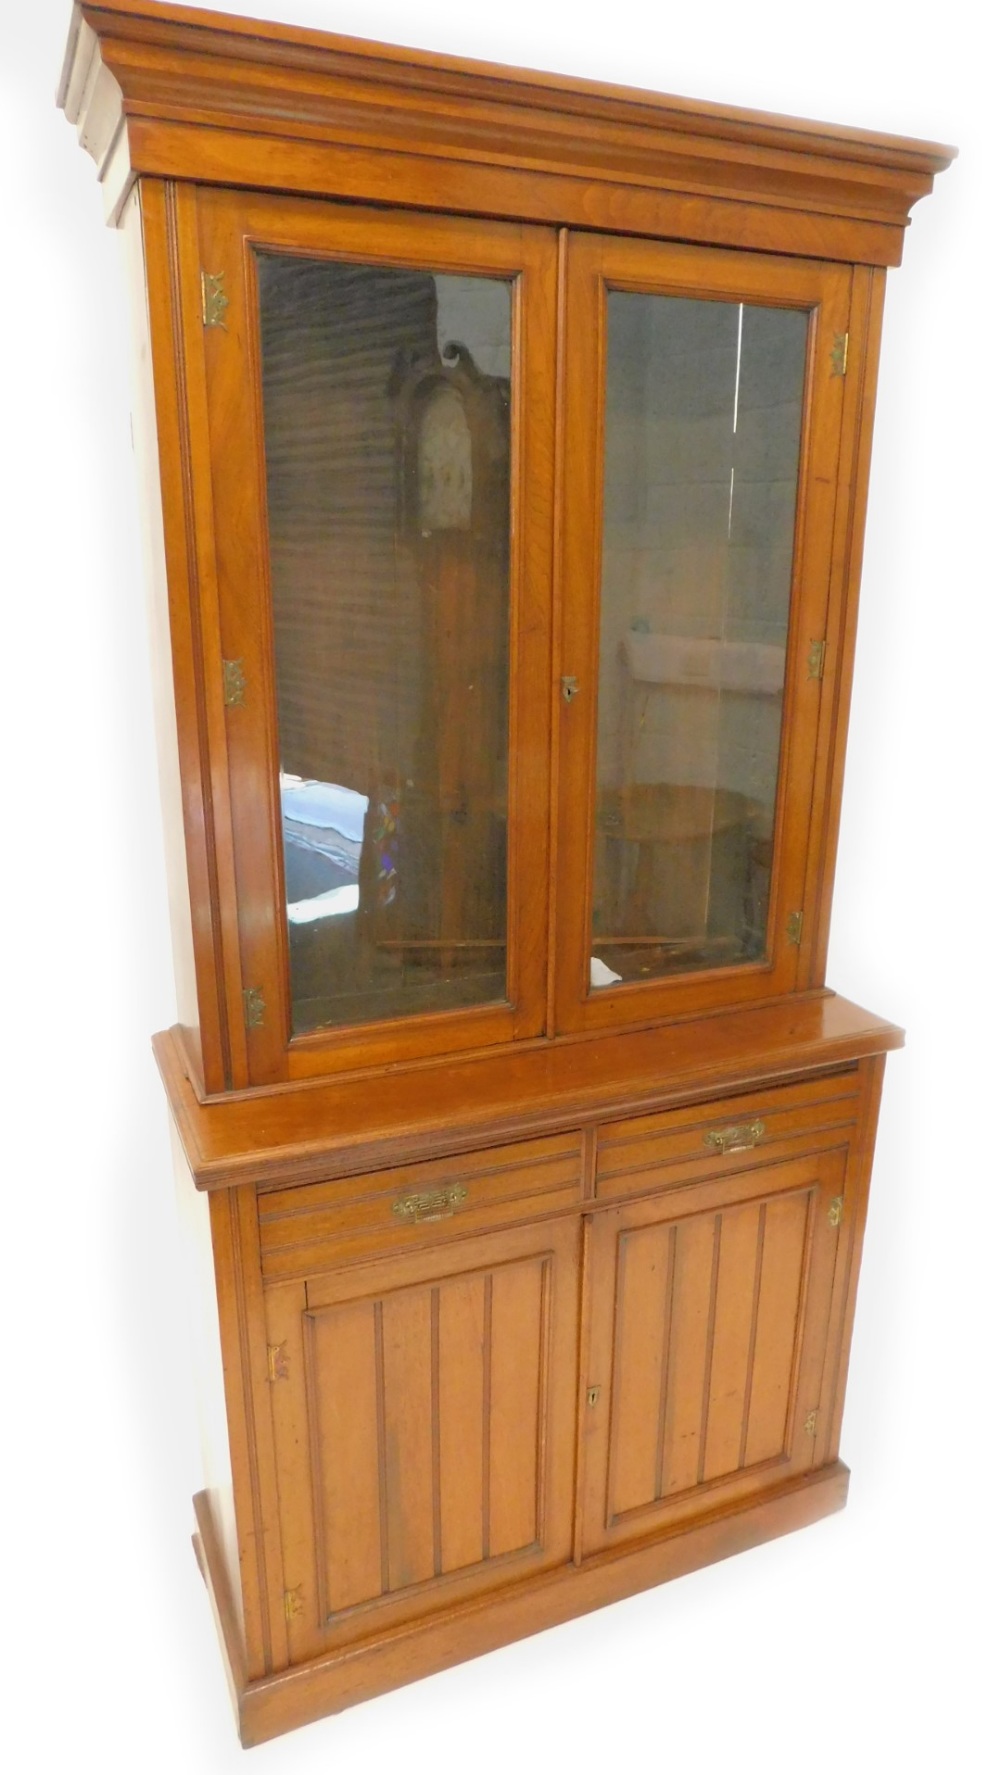 A Victorian walnut bookcase, the top with a moulded cornice, with two glazed doors, the base with